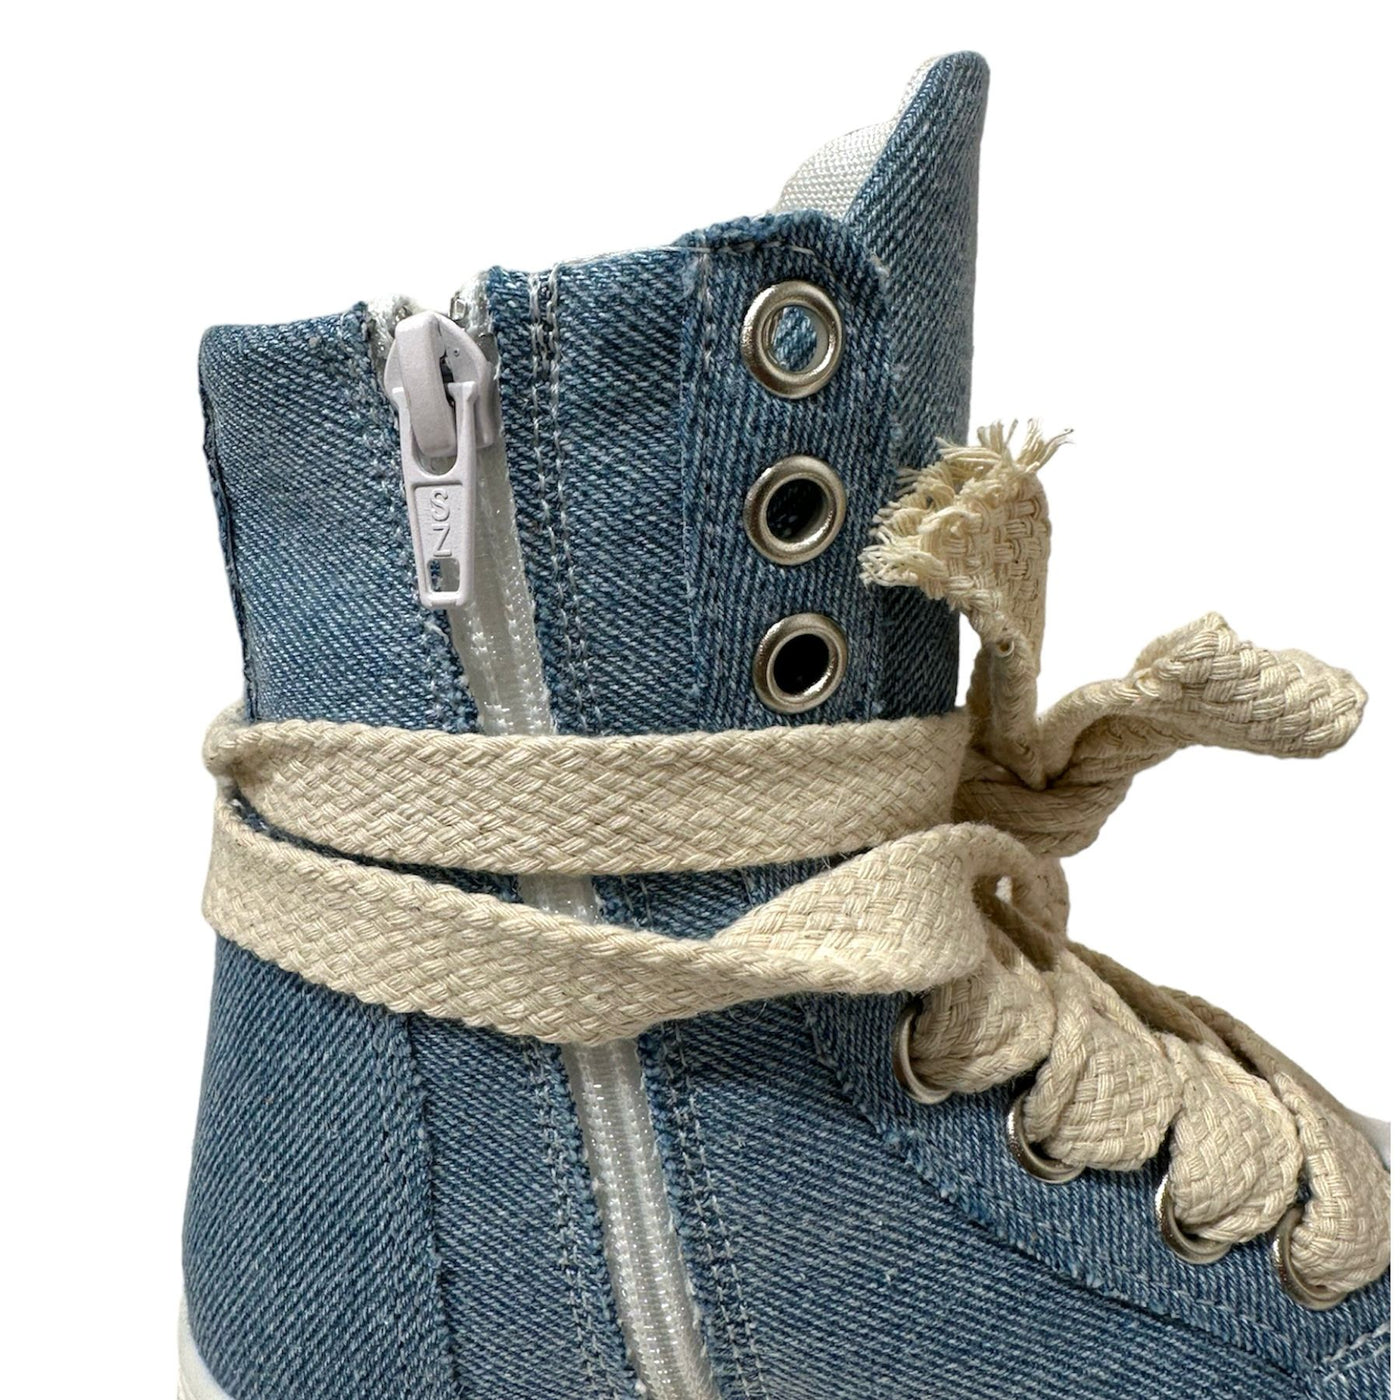 SNEAKERS POWER JEANS K2 BAMBINA